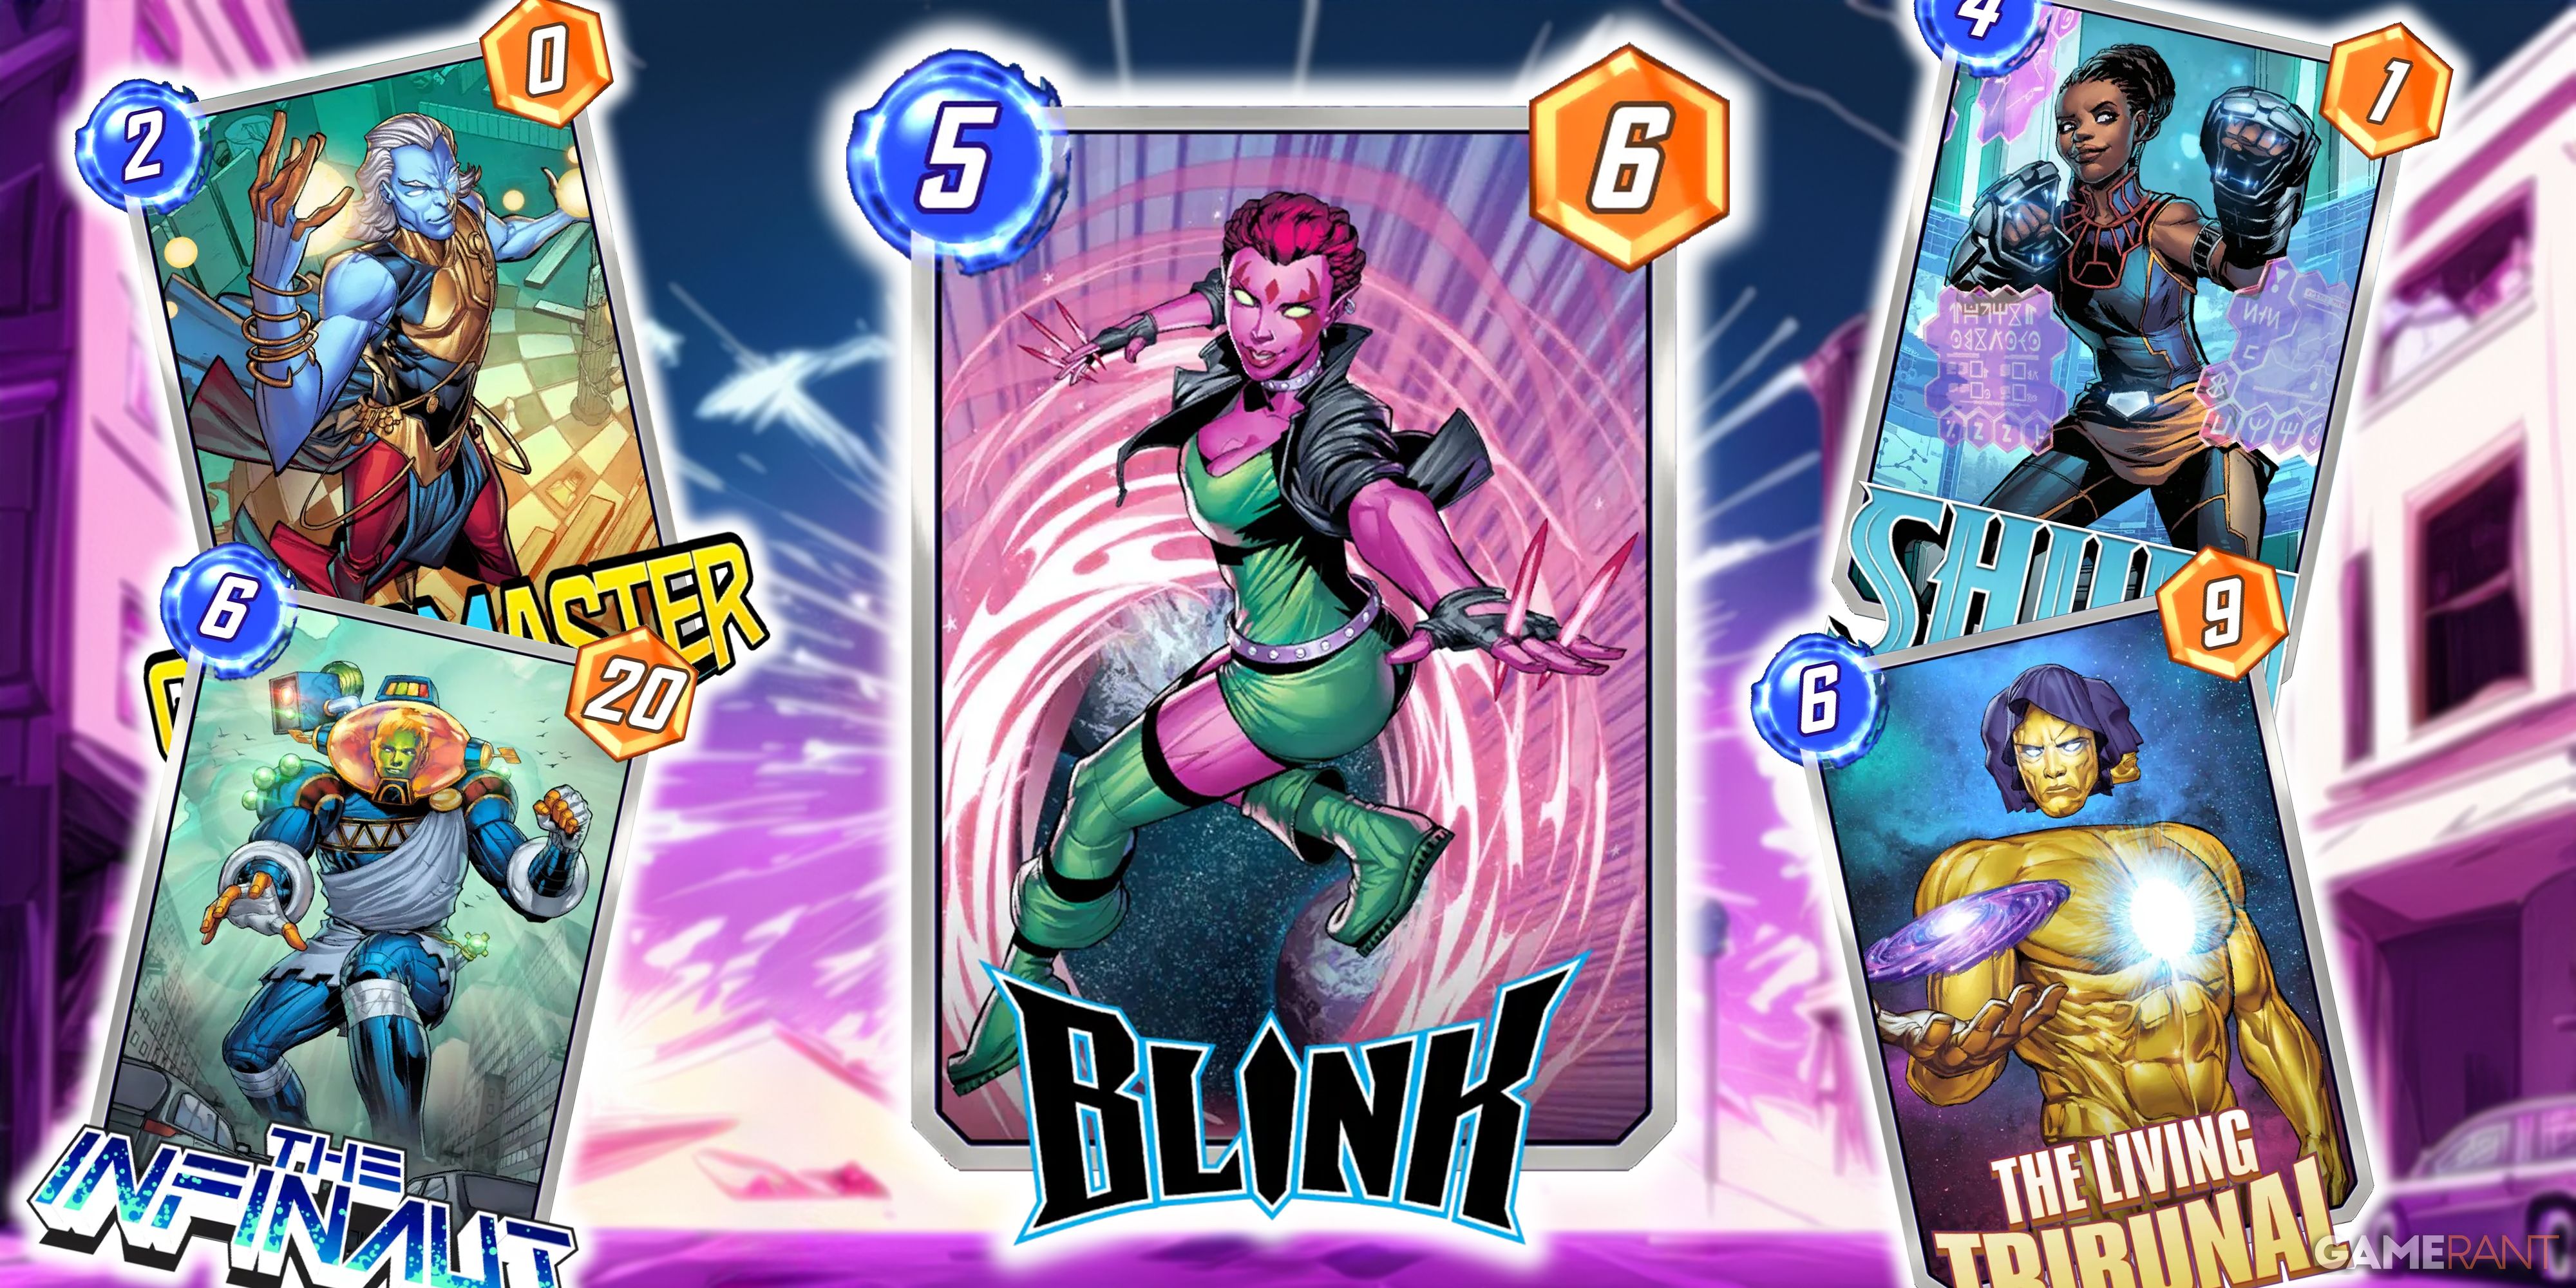 Marvel Snap's Blink card surrounded by Grandmaster, The Infinaut, Shuri, and The Living Tribunal.